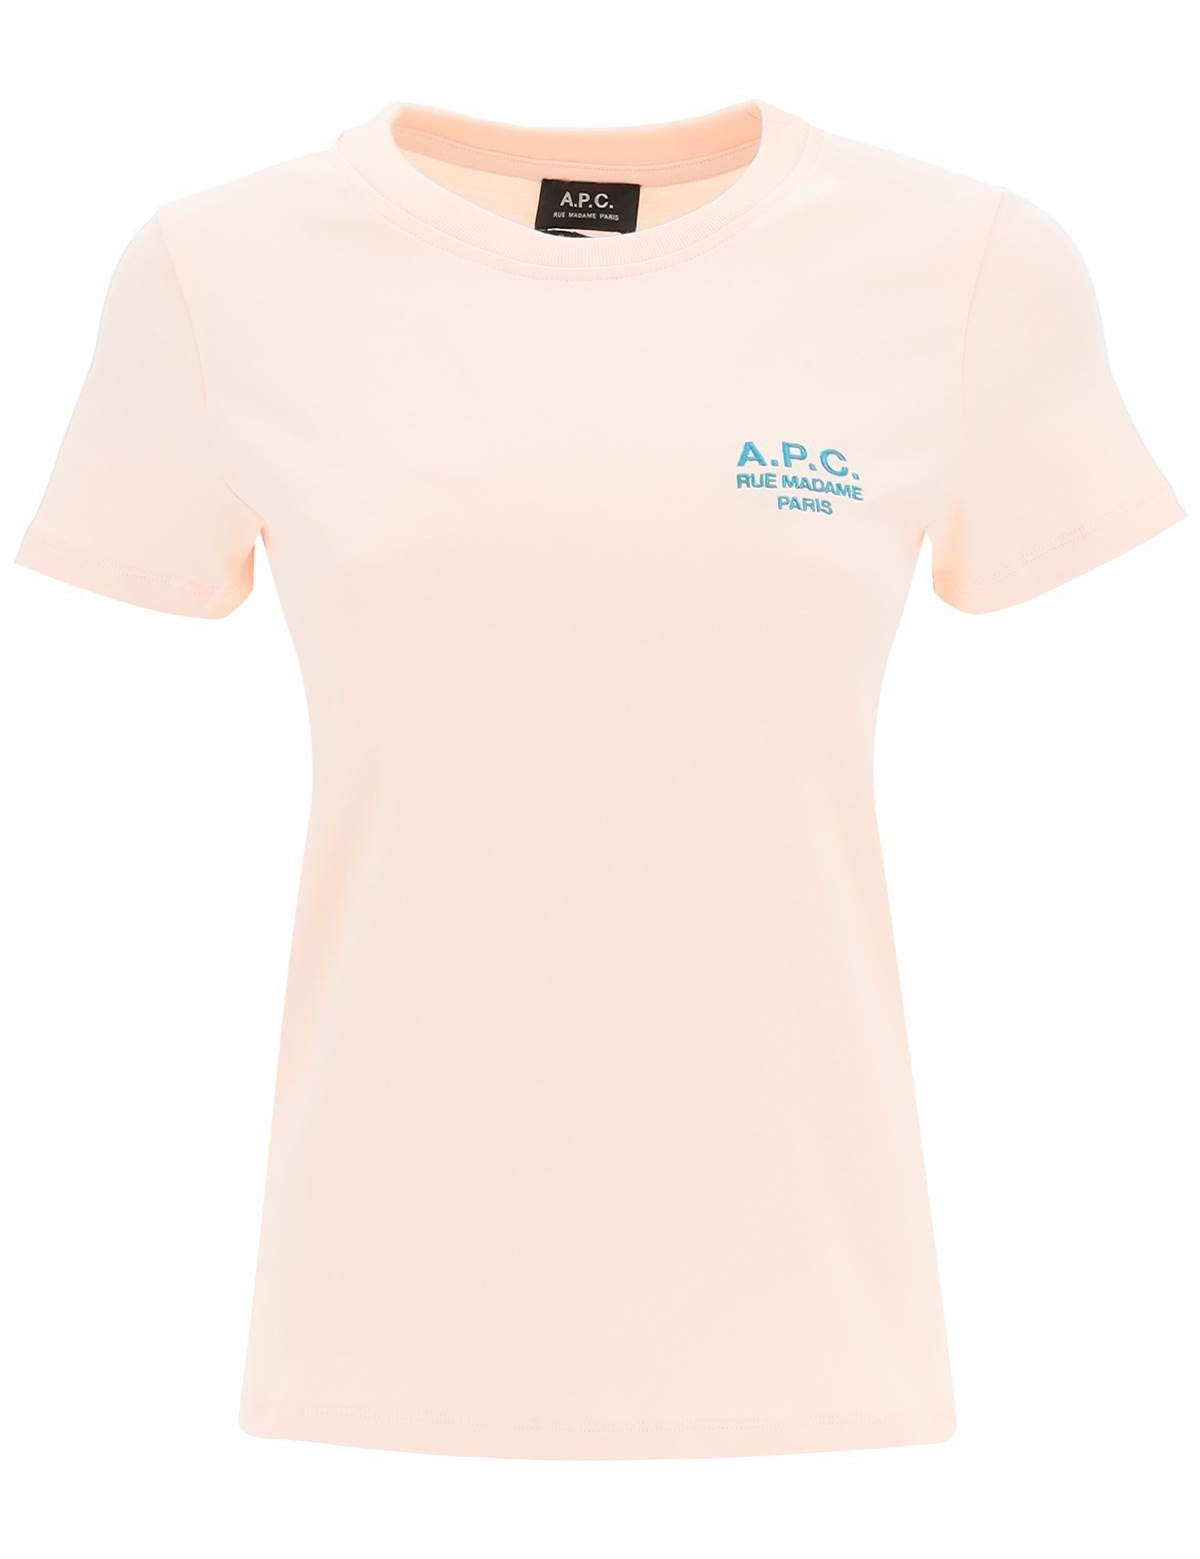 new-denise-t-shirt-with-logo-embroidery.jpg